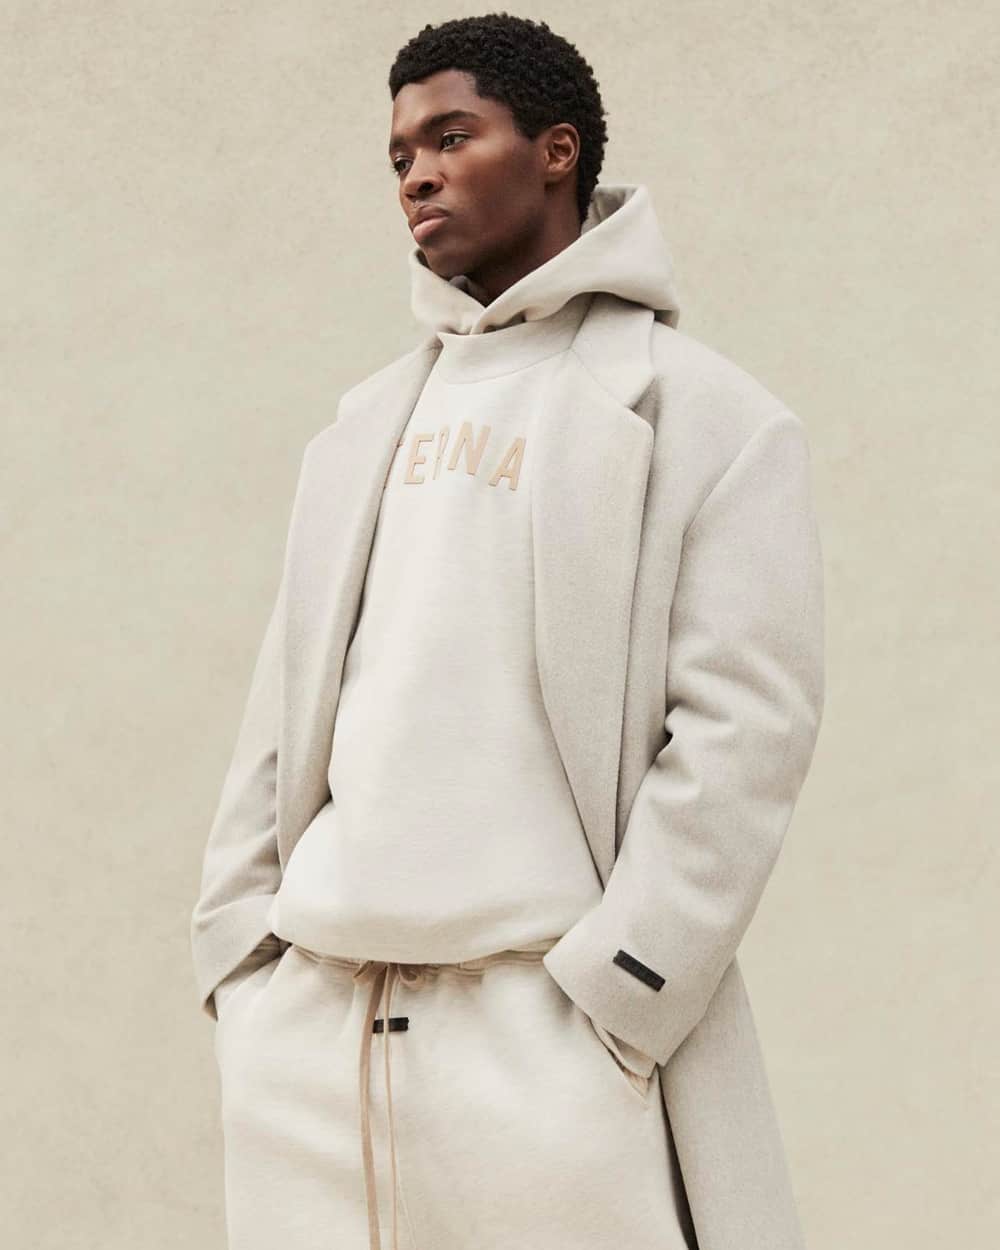 Black man wearing an off-white Fear of God hoodie, logo sweatshirt and matching sweatpants with an off-white overcoat